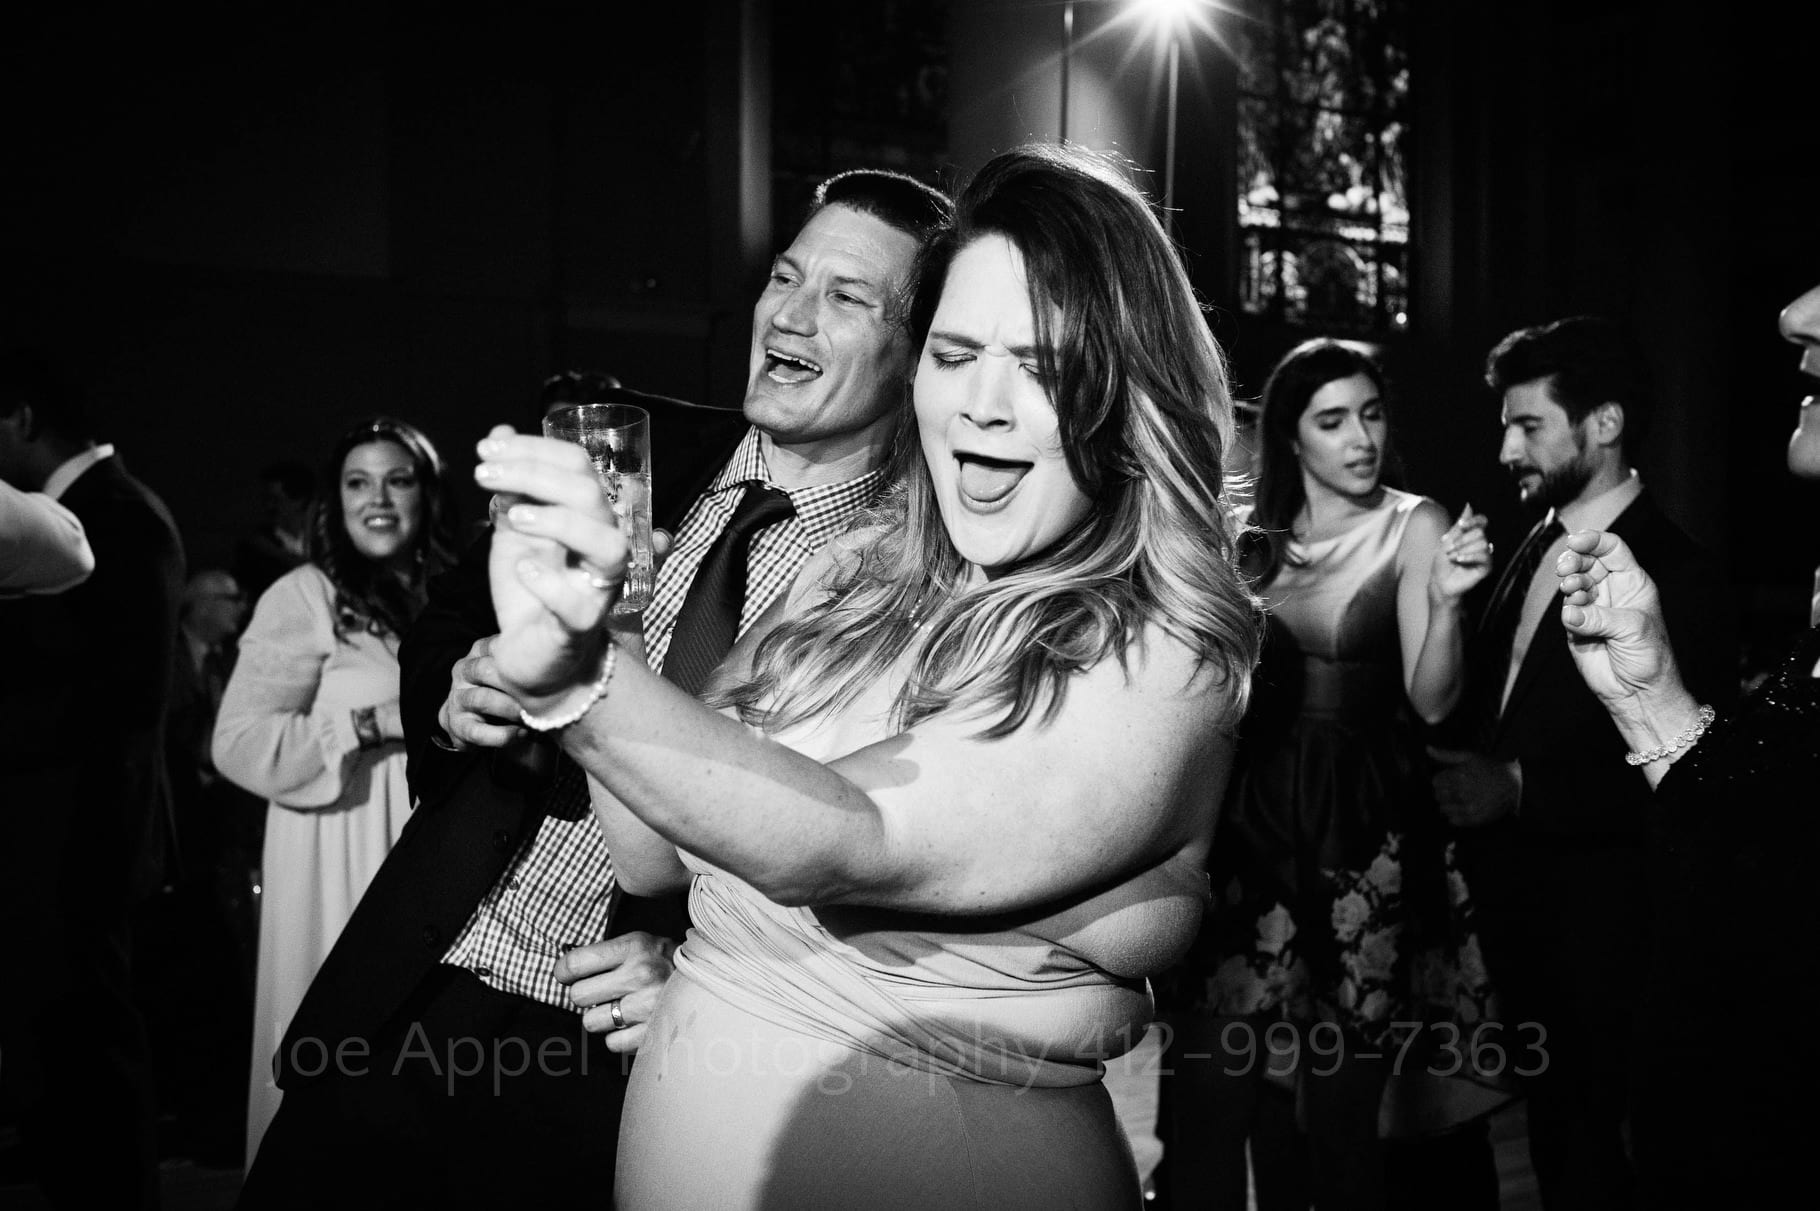 A smiling woman and man dance side by side during a wedding reception.